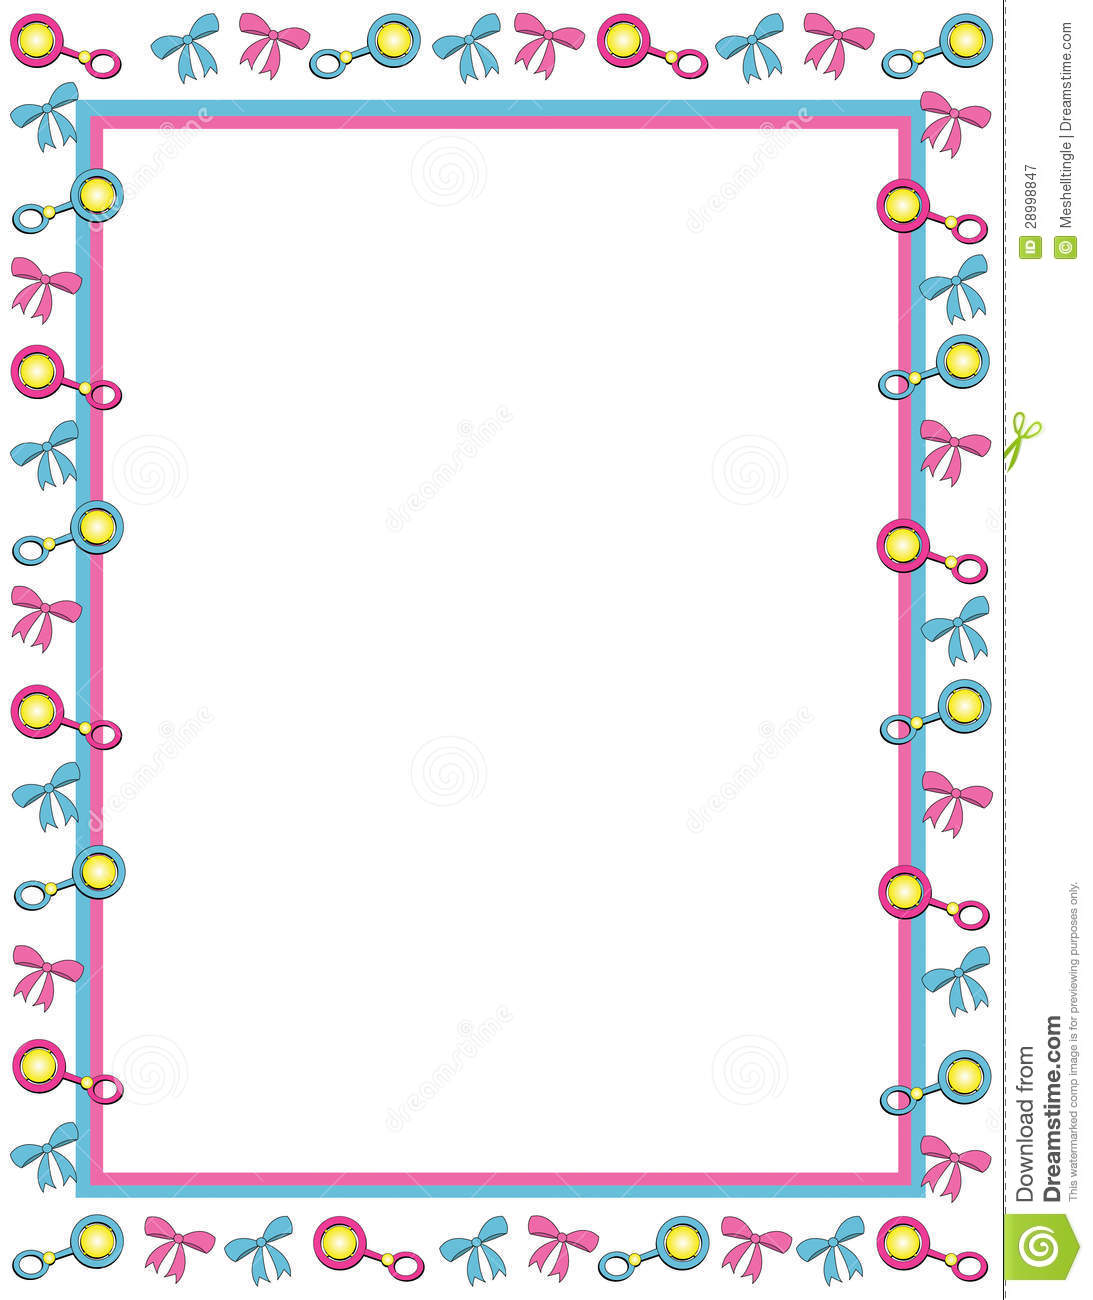 Baby Clip Art Borders and Frames